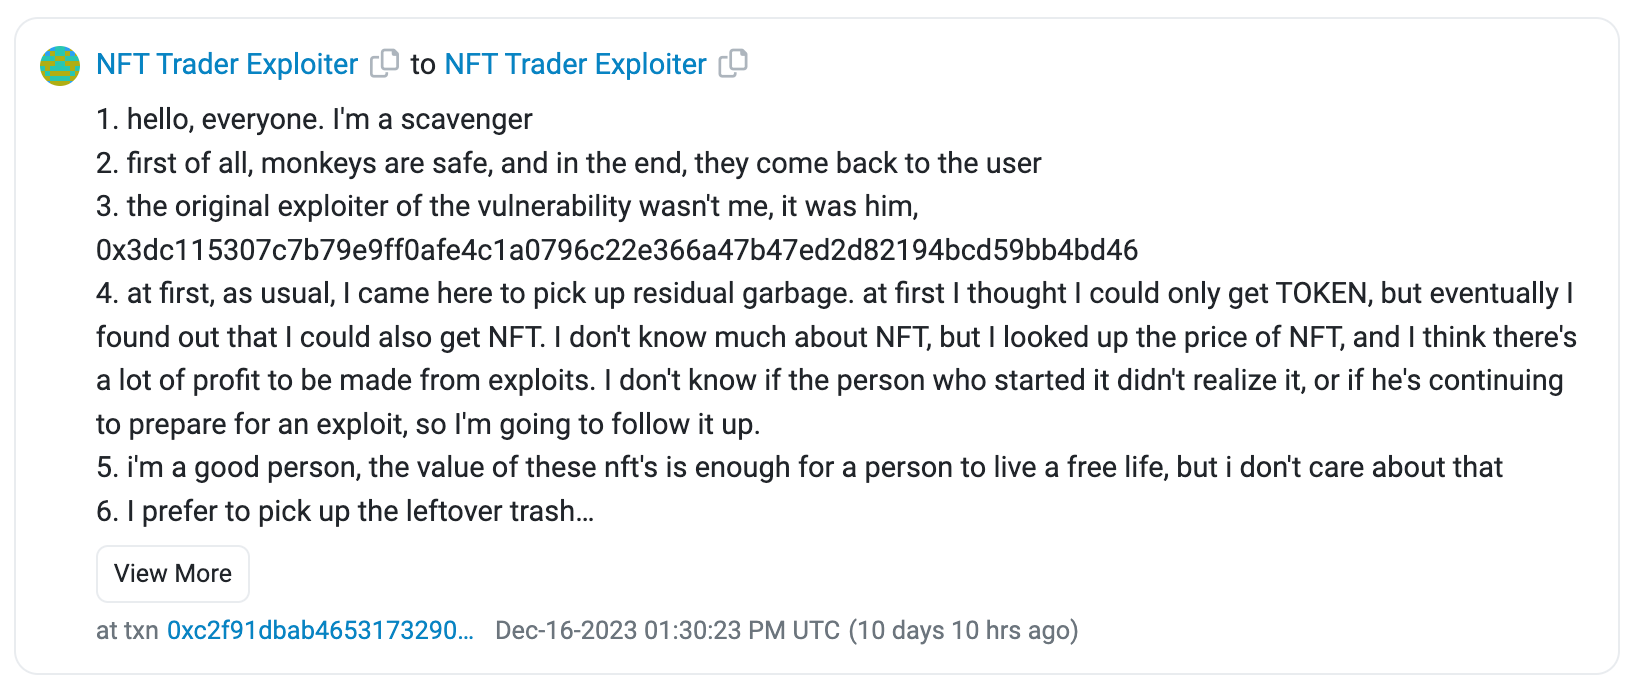 NFT Trader Exploiter to NFT Trader Exploiter 1. hello, everyone. I'm a scavenger 2. first of all, monkeys are safe, and in the end, they come back to the user 3. the original exploiter of the vulnerability wasn't me, it was him, 0x3dc115307c7b79e9ff0afe4c1a0796c22e366a47b47ed2d82194bcd59bb4bd46 4. at first, as usual, I came here to pick up residual garbage. at first I thought I could only get TOKEN, but eventually I found out that I could also get NFT. I don't know much about NFT, but I looked up the price of NFT, and I think there's a lot of profit to be made from exploits. I don't know if the person who started it didn't realize it, or if he's continuing to prepare for an exploit, so I'm going to follow it up. 5. i'm a good person, the value of these nft's is enough for a person to live a free life, but i don't care about that 6. I prefer to pick up the leftover trash